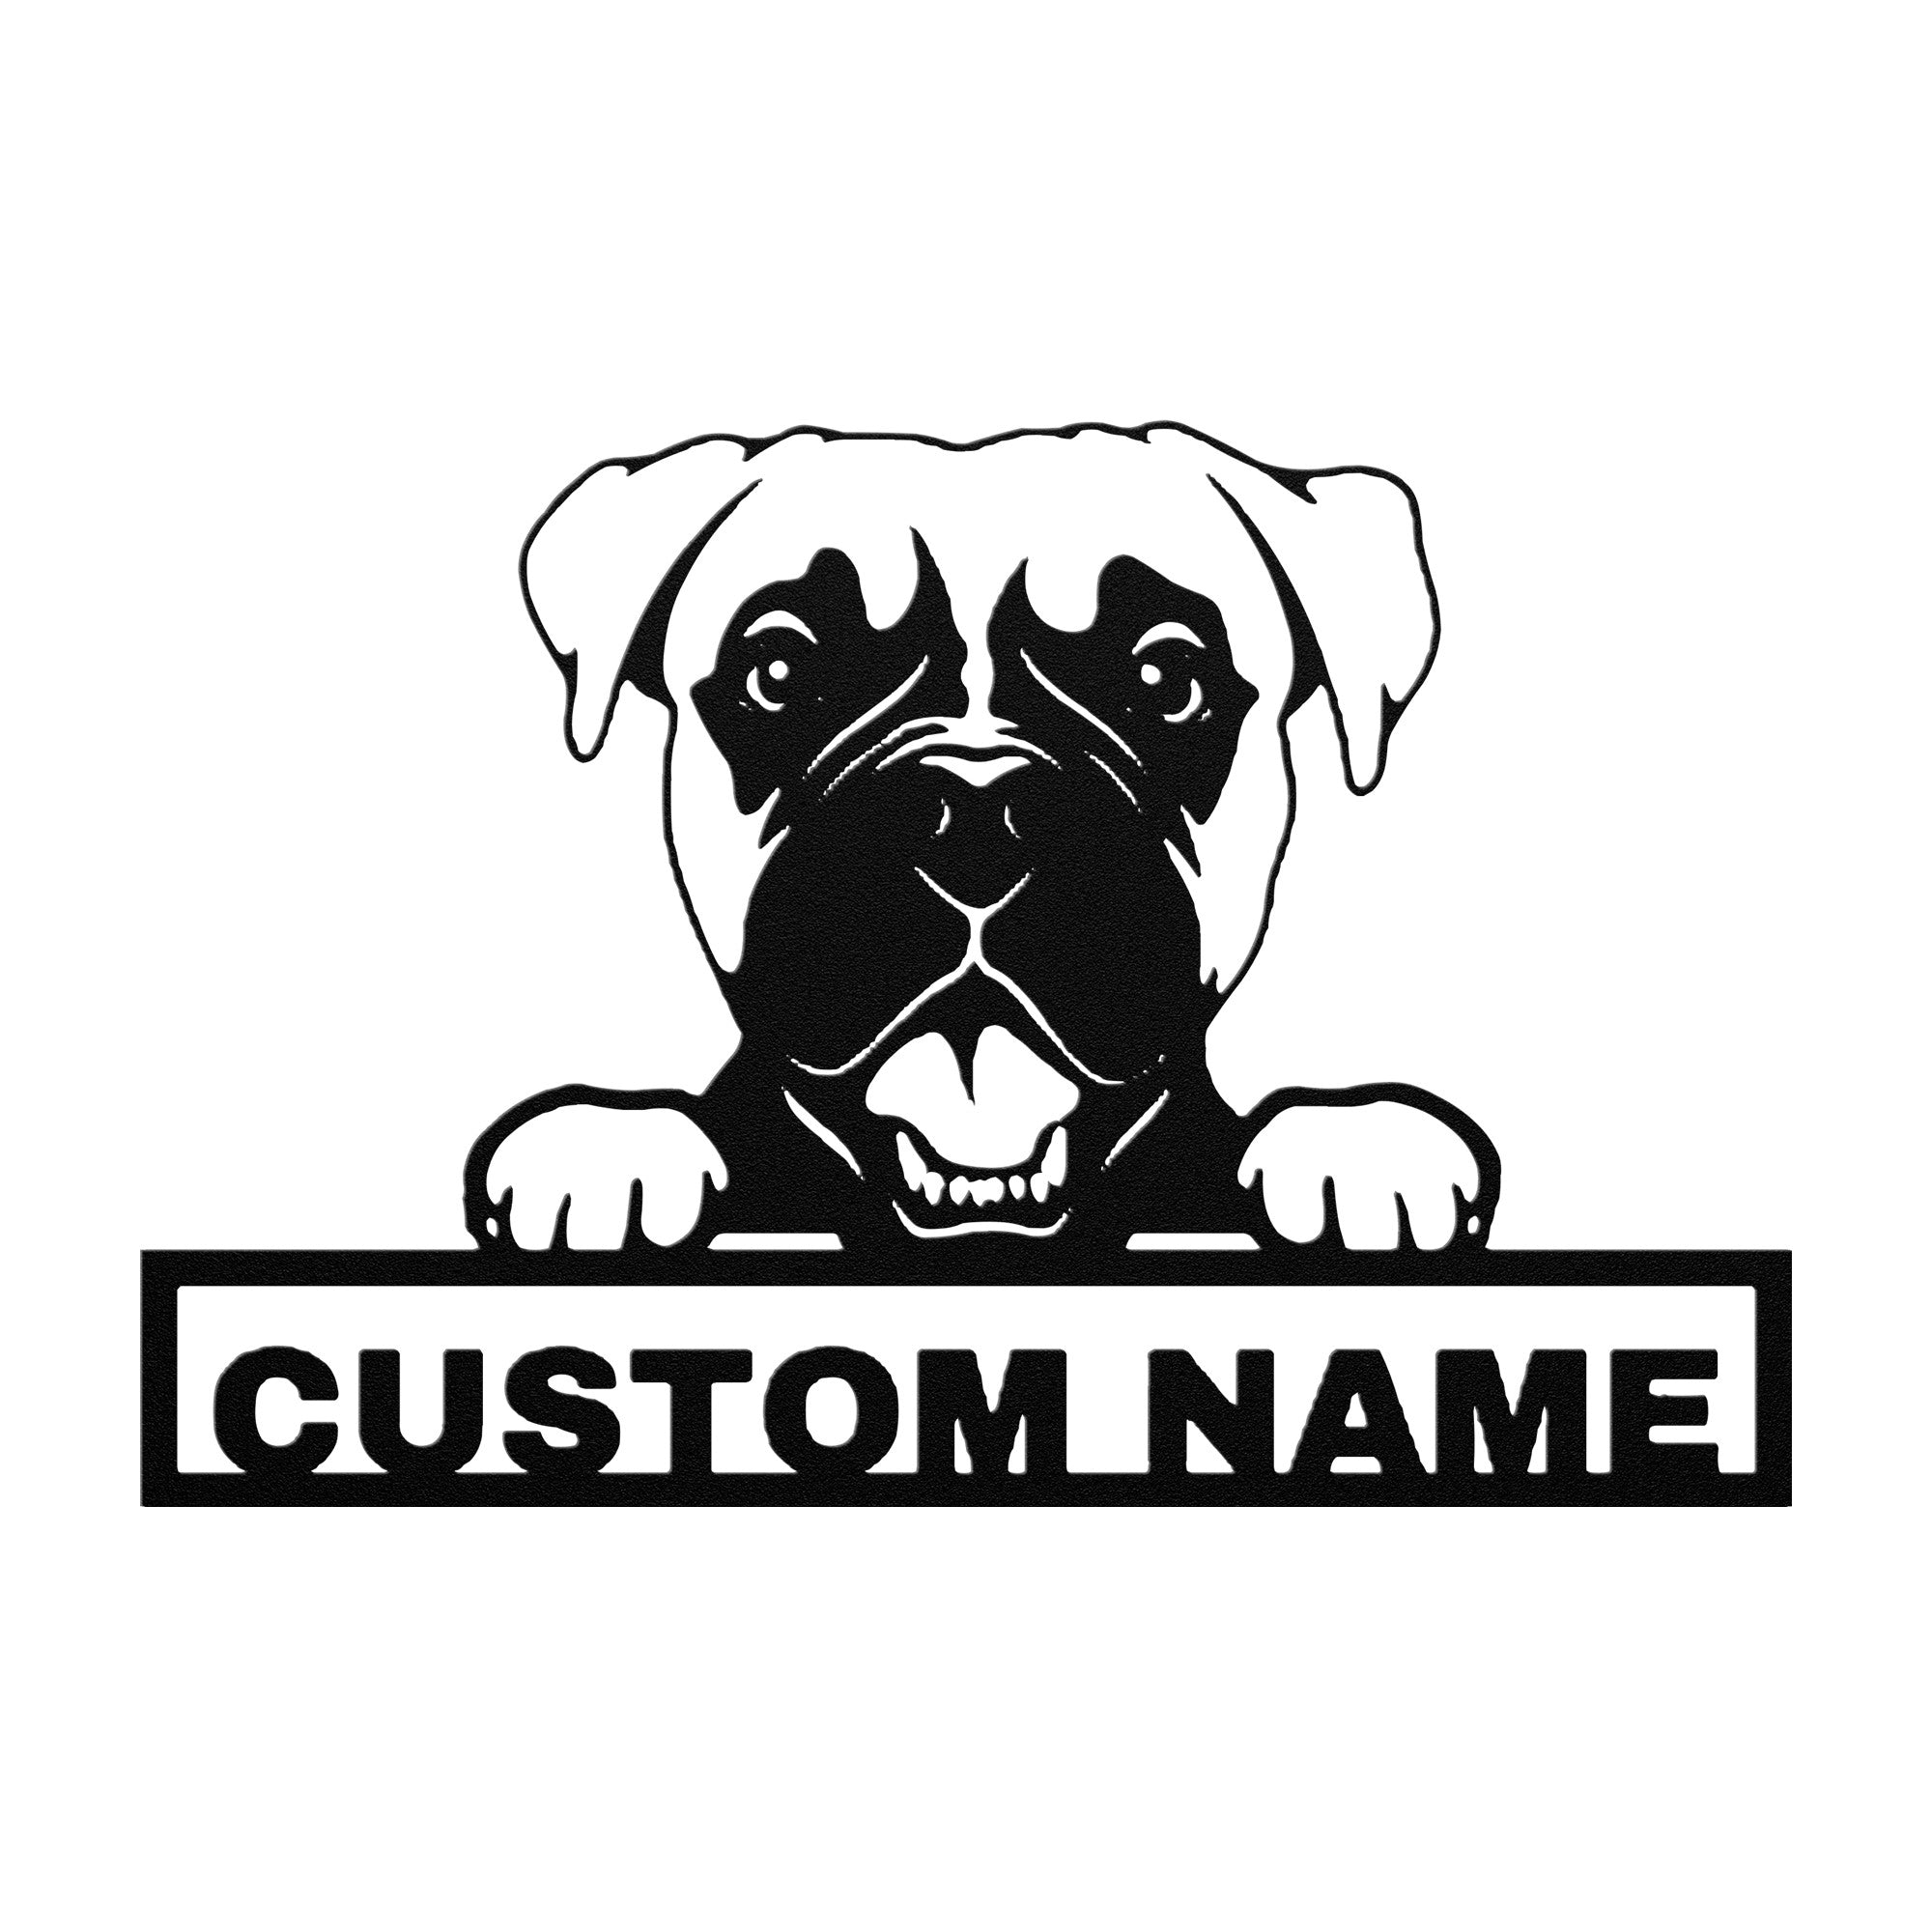 Personalized Boxer Dog Metal Sign - Boxer Custom Name Wall Decor, Metal Signs Customized Outdoor Indoor, Wall Art Gift For Boxer Dog Lover